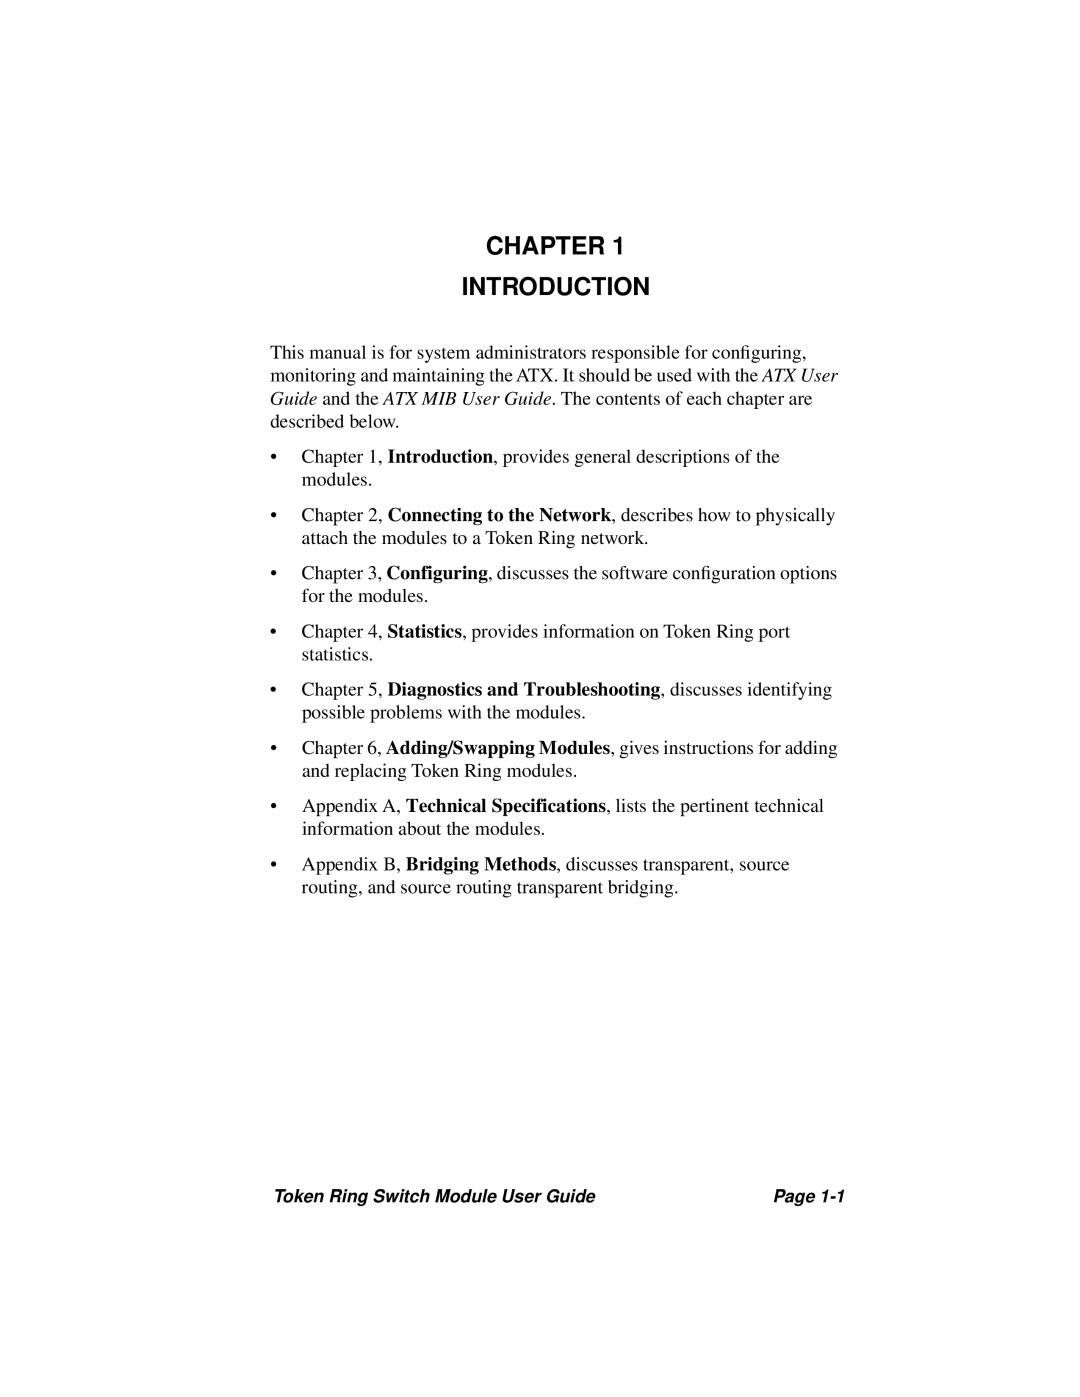 Cabletron Systems 3T02-04 manual Chapter Introduction 